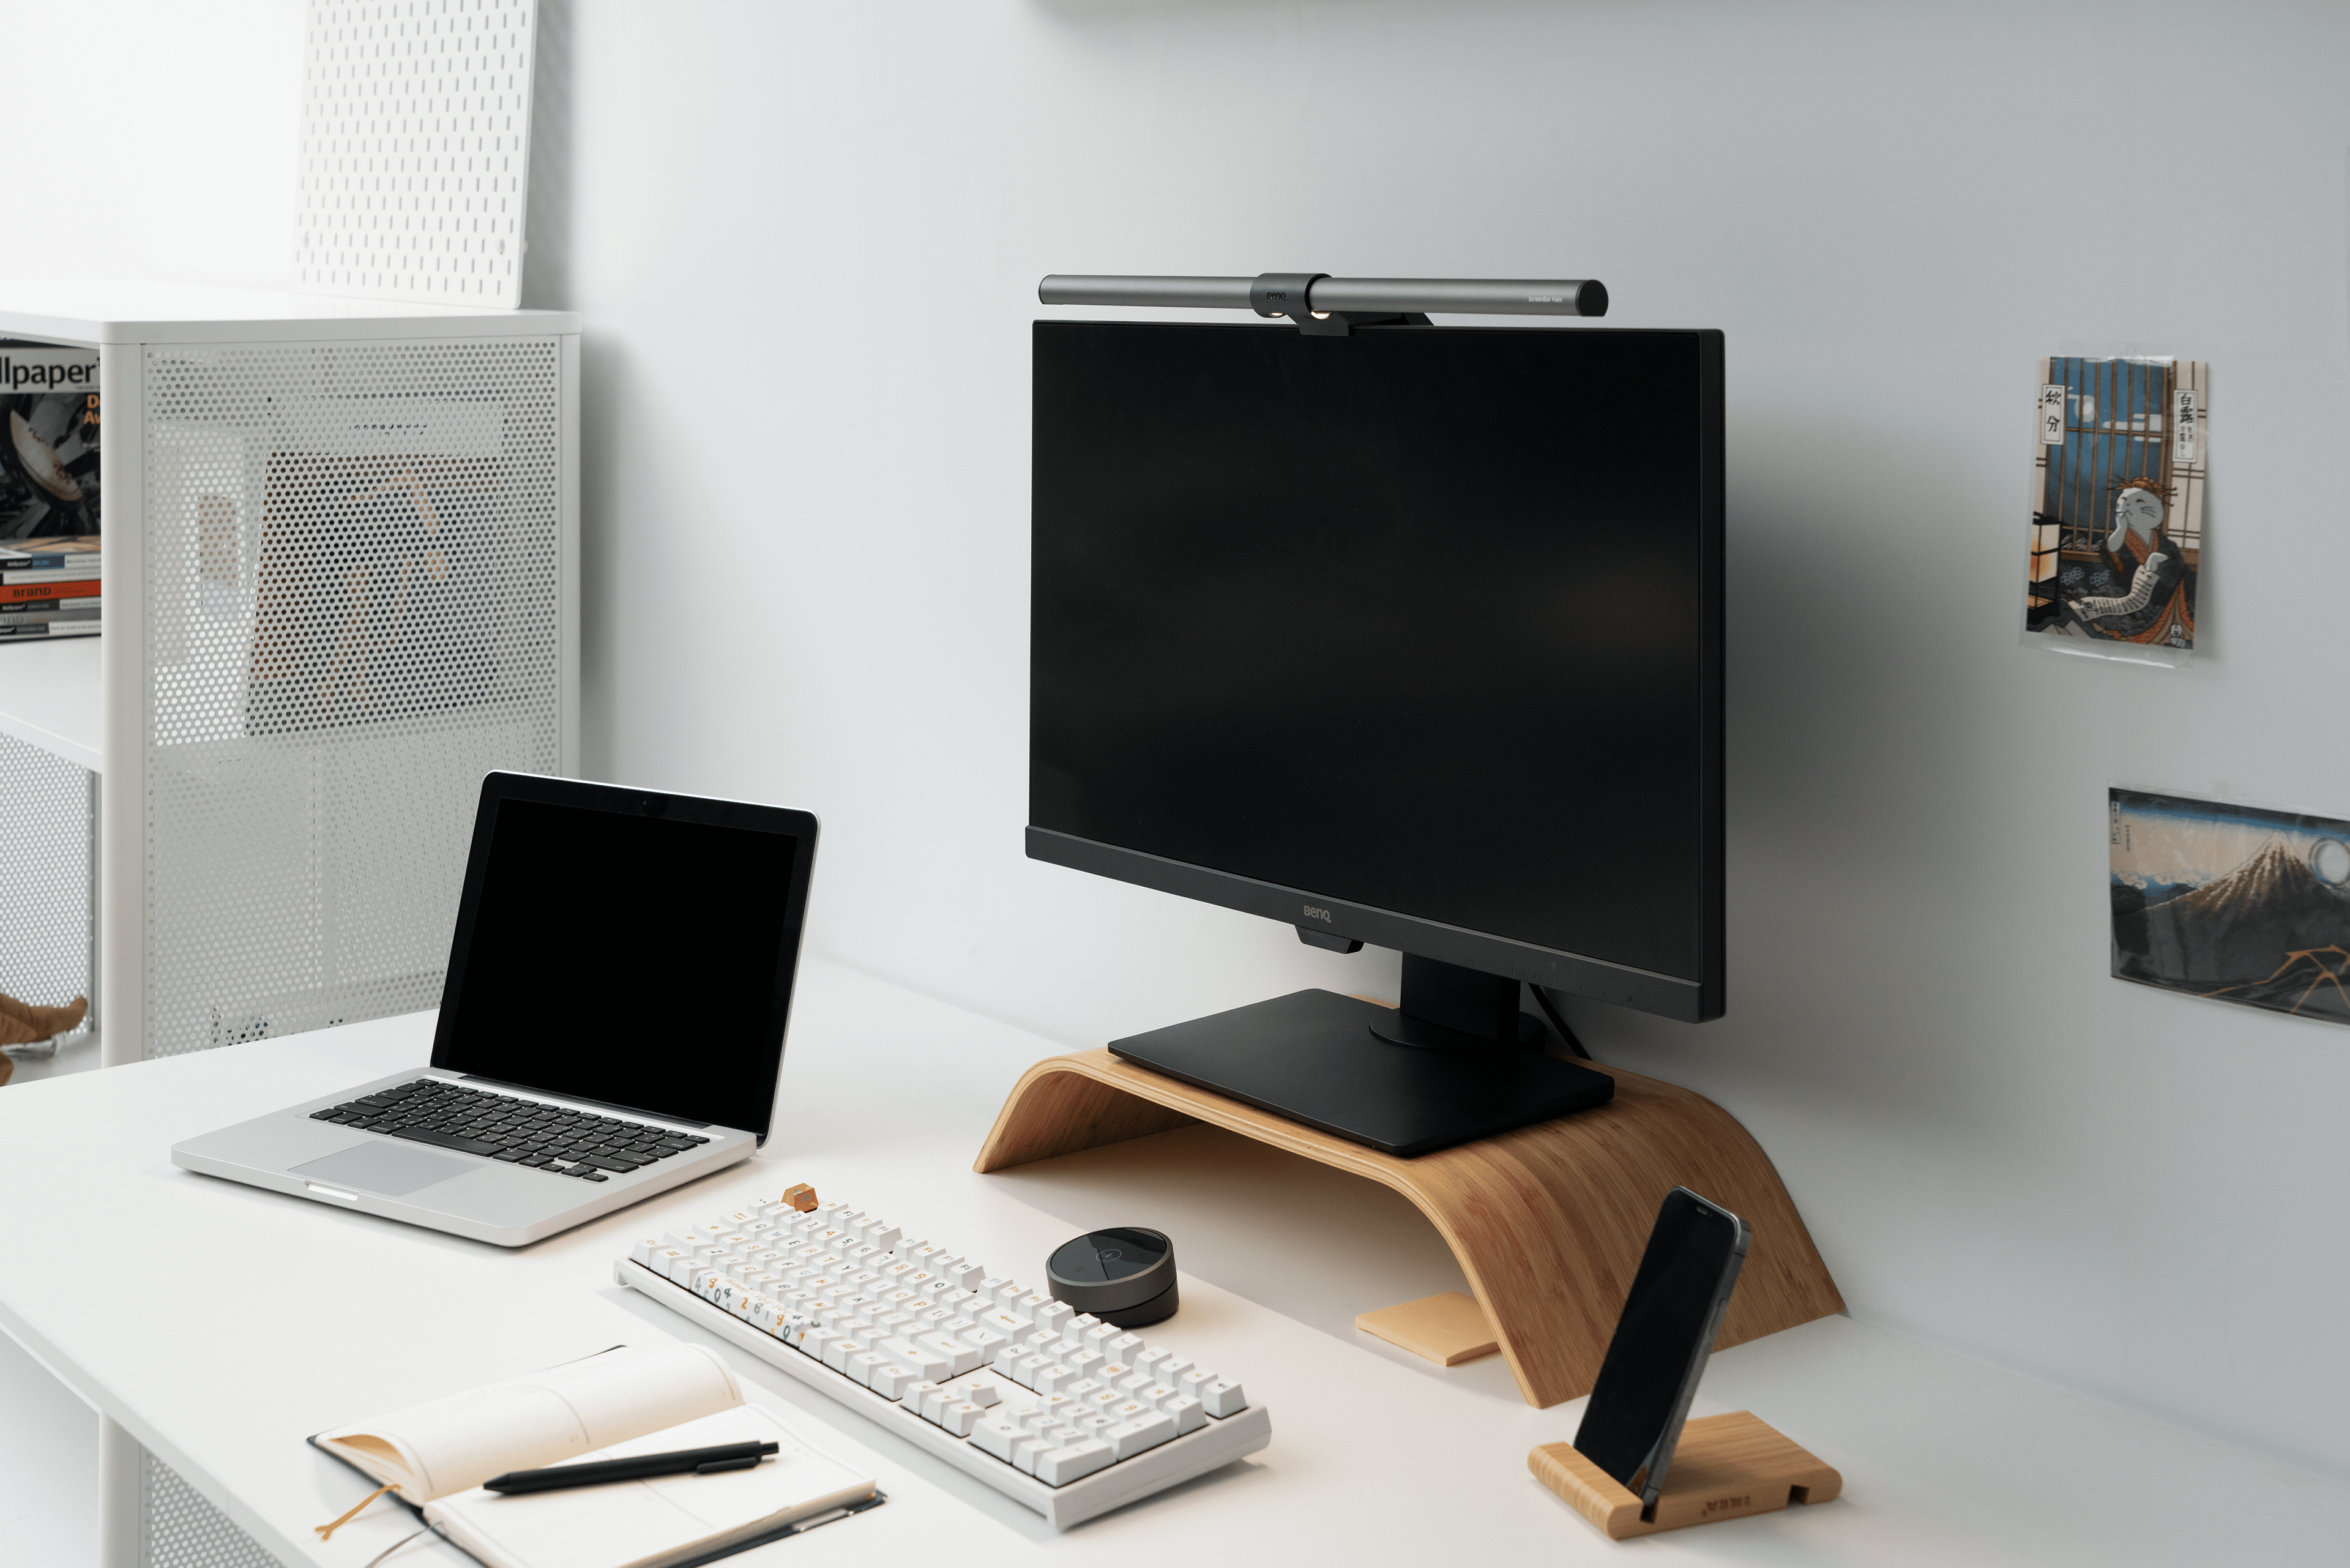 BenQ ScreenBars have a built-in sensor, so that with just a simple tap they auto adjust brightness throughout the day to deliver 500 lumens to your desk.